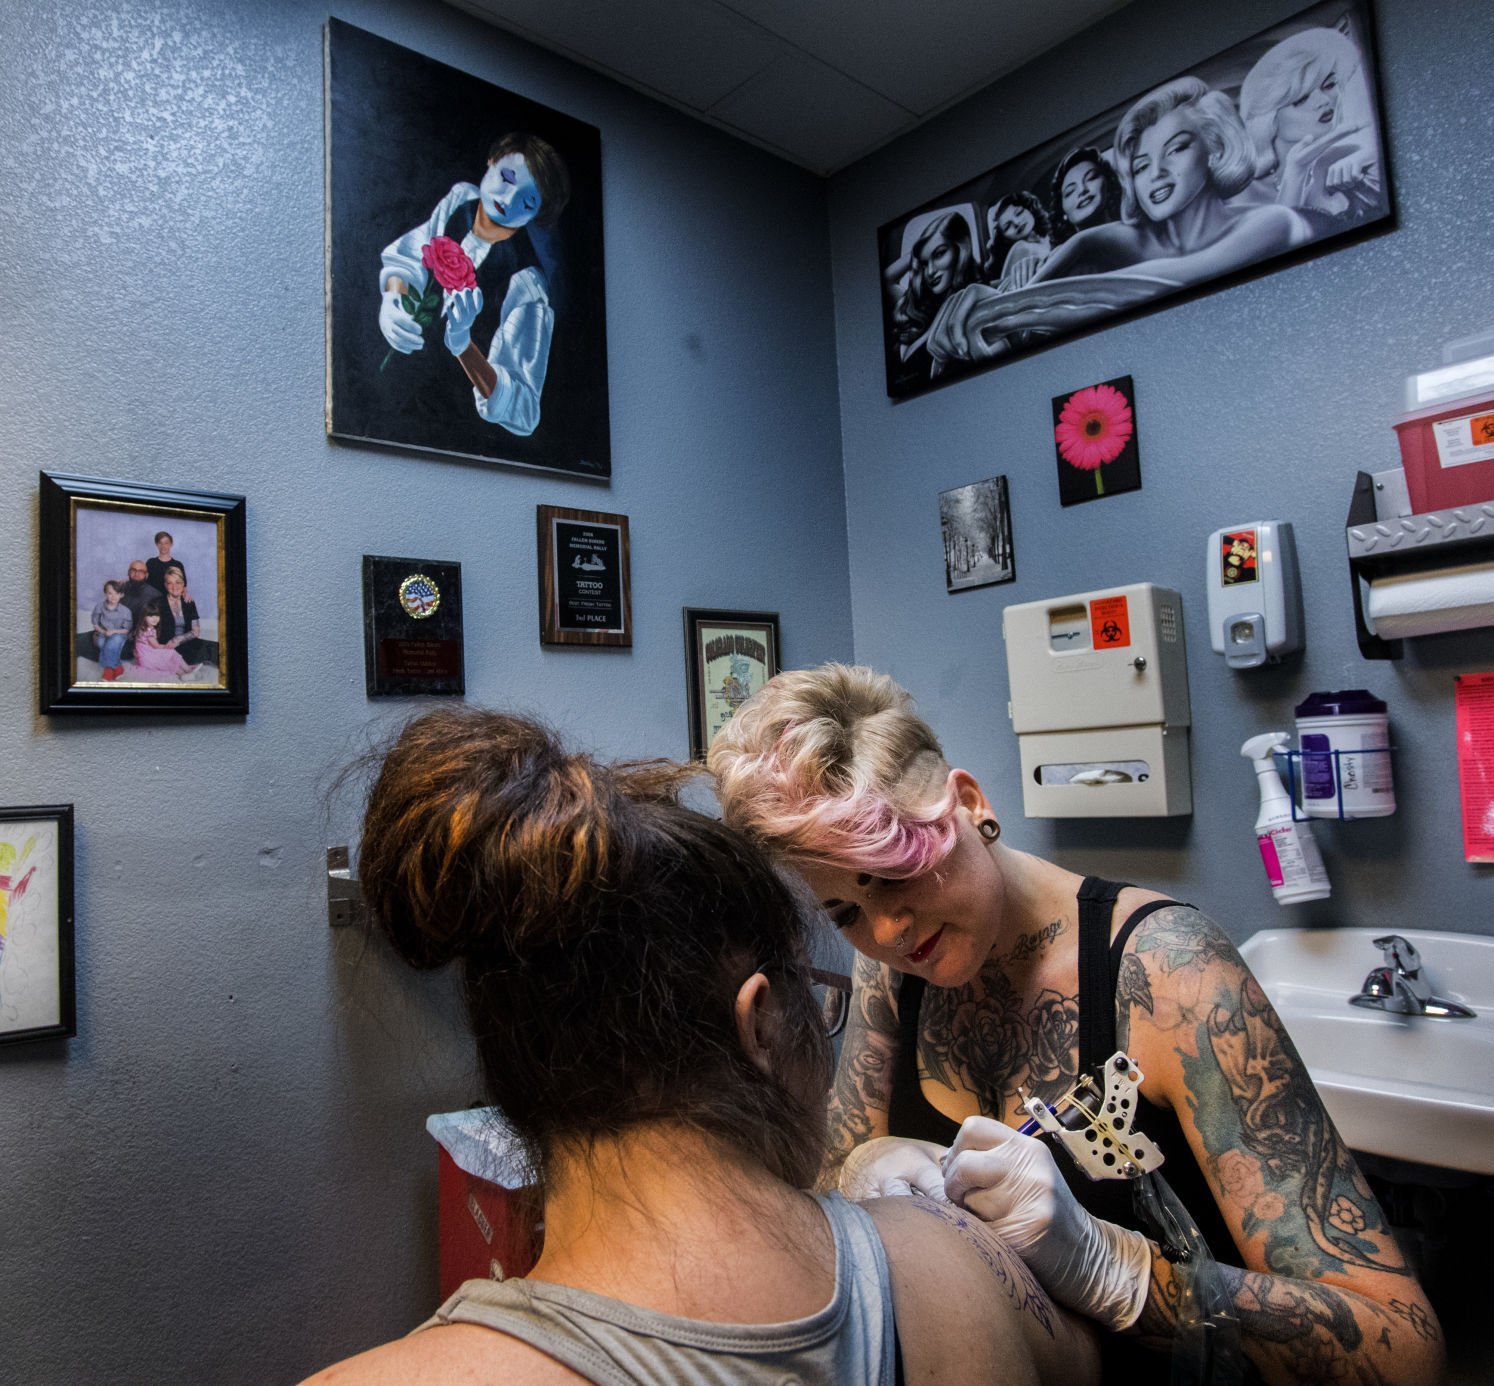 The 10 Best Tattoo Parlors in Colorado